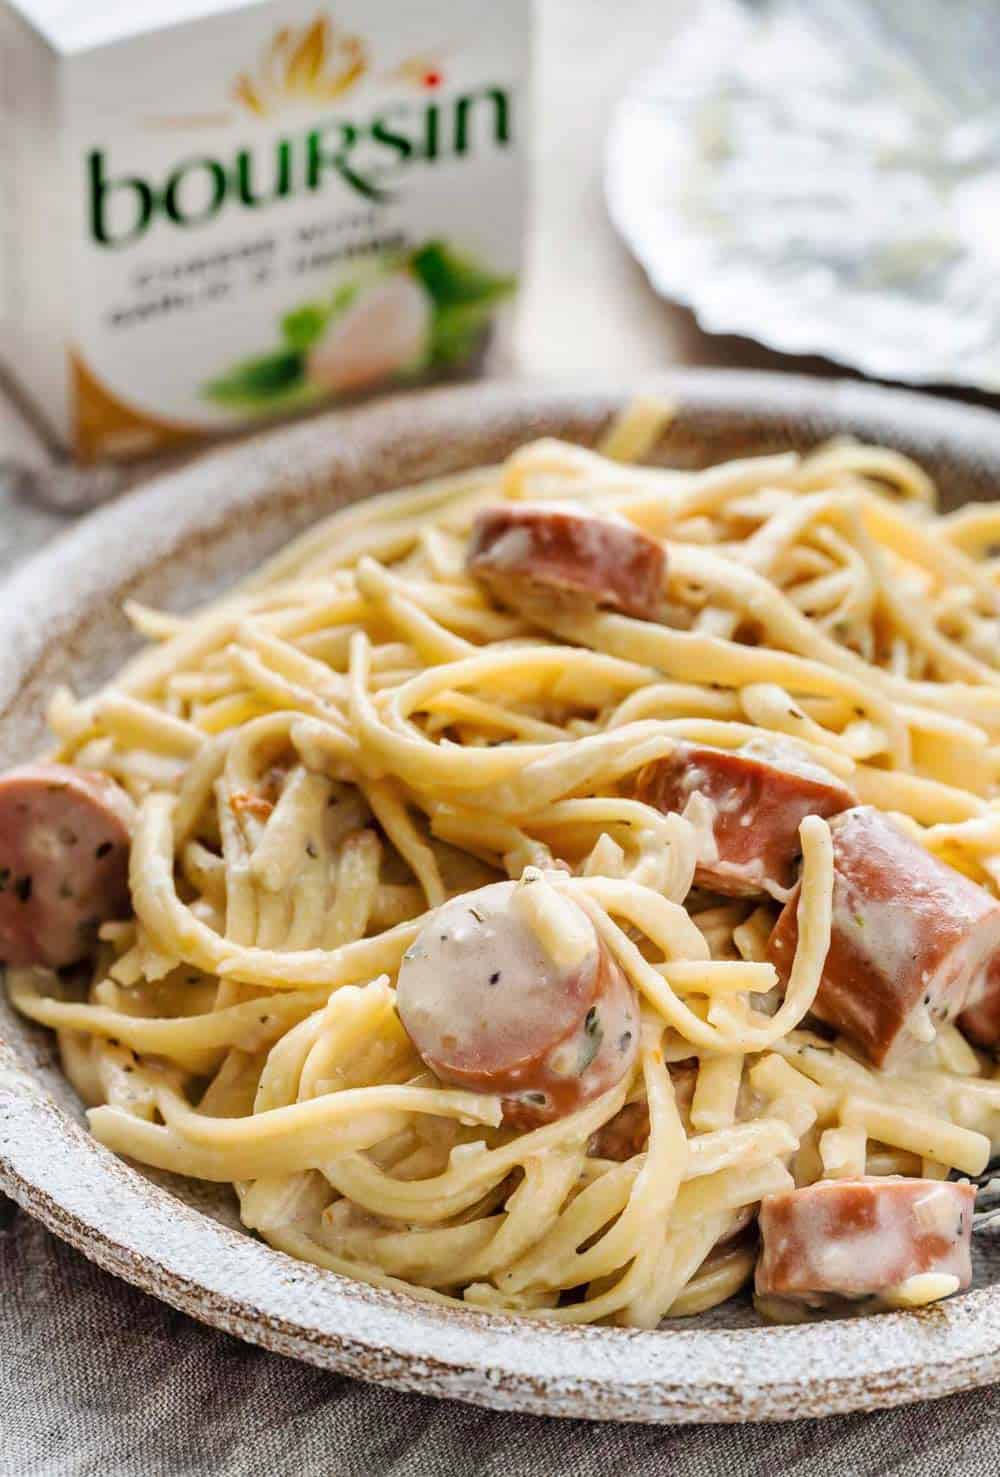 Boursin Cheese Pasta with Smoked Sausage served on a plate, a pack of Boursin Cheese in the background.